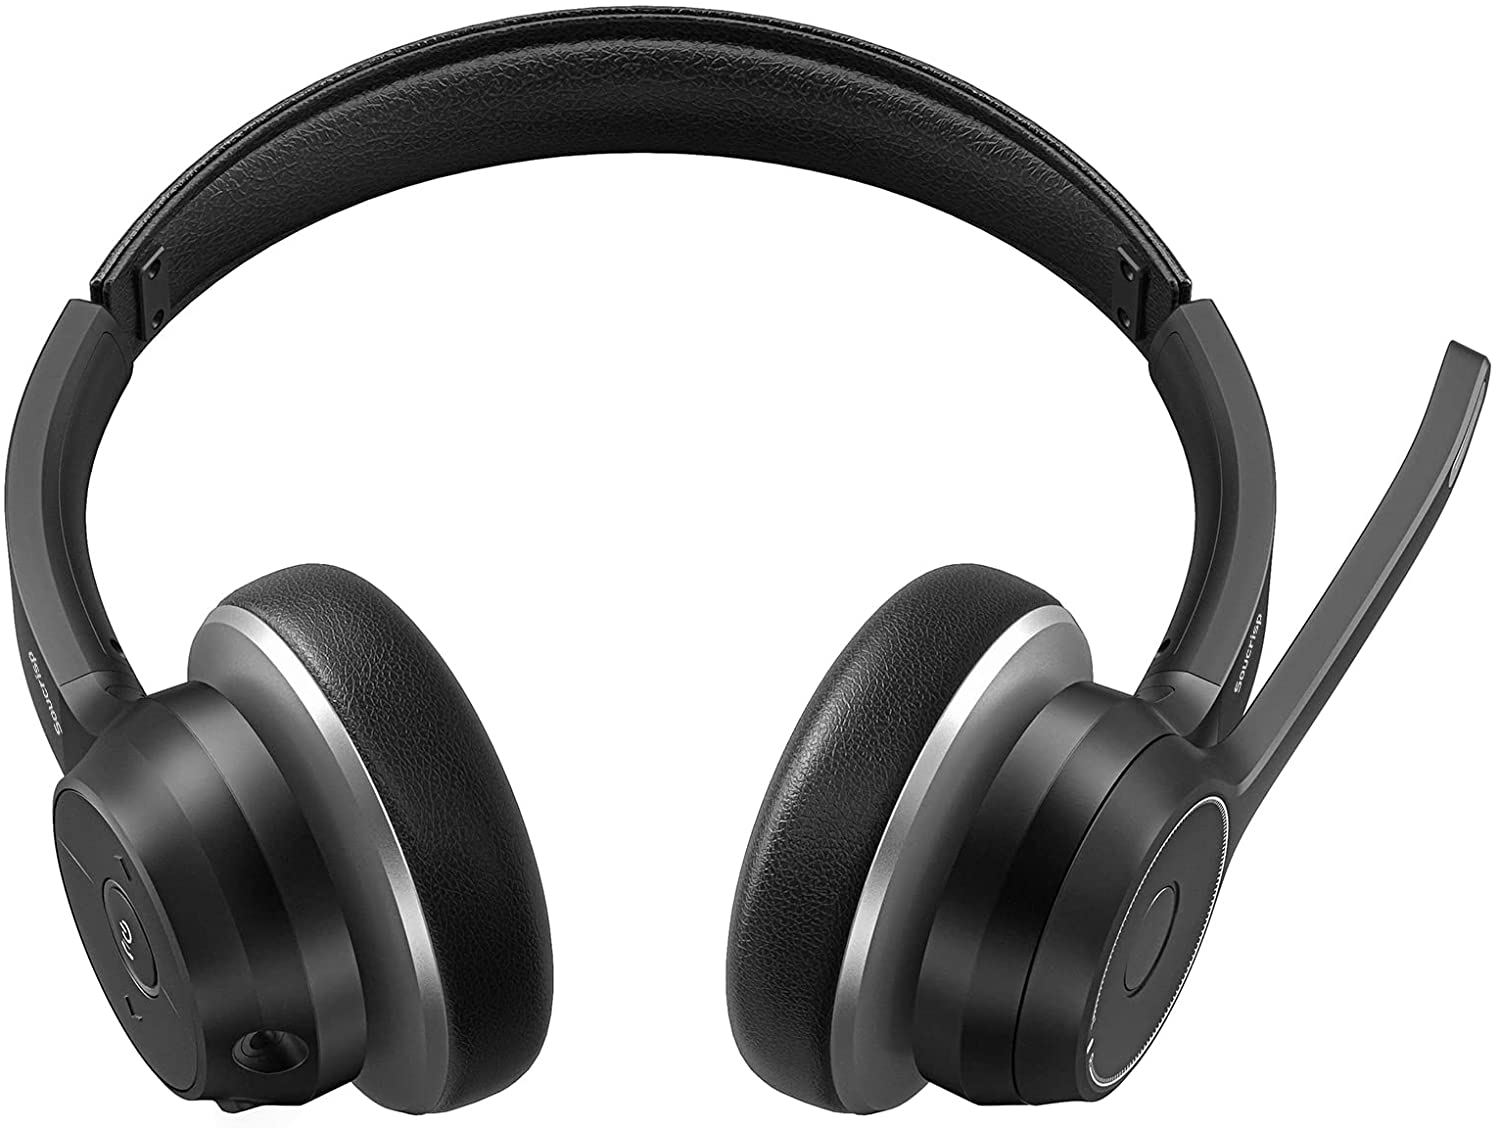 Bluetooth Office Headphone with Dual Mic, 22+Hrs Talk Time with CVC8.0 Noise Canceling Microphone, Breathable Earmuff for Comfort, Wireless Cell Phone Headset with Mute for Business, Music